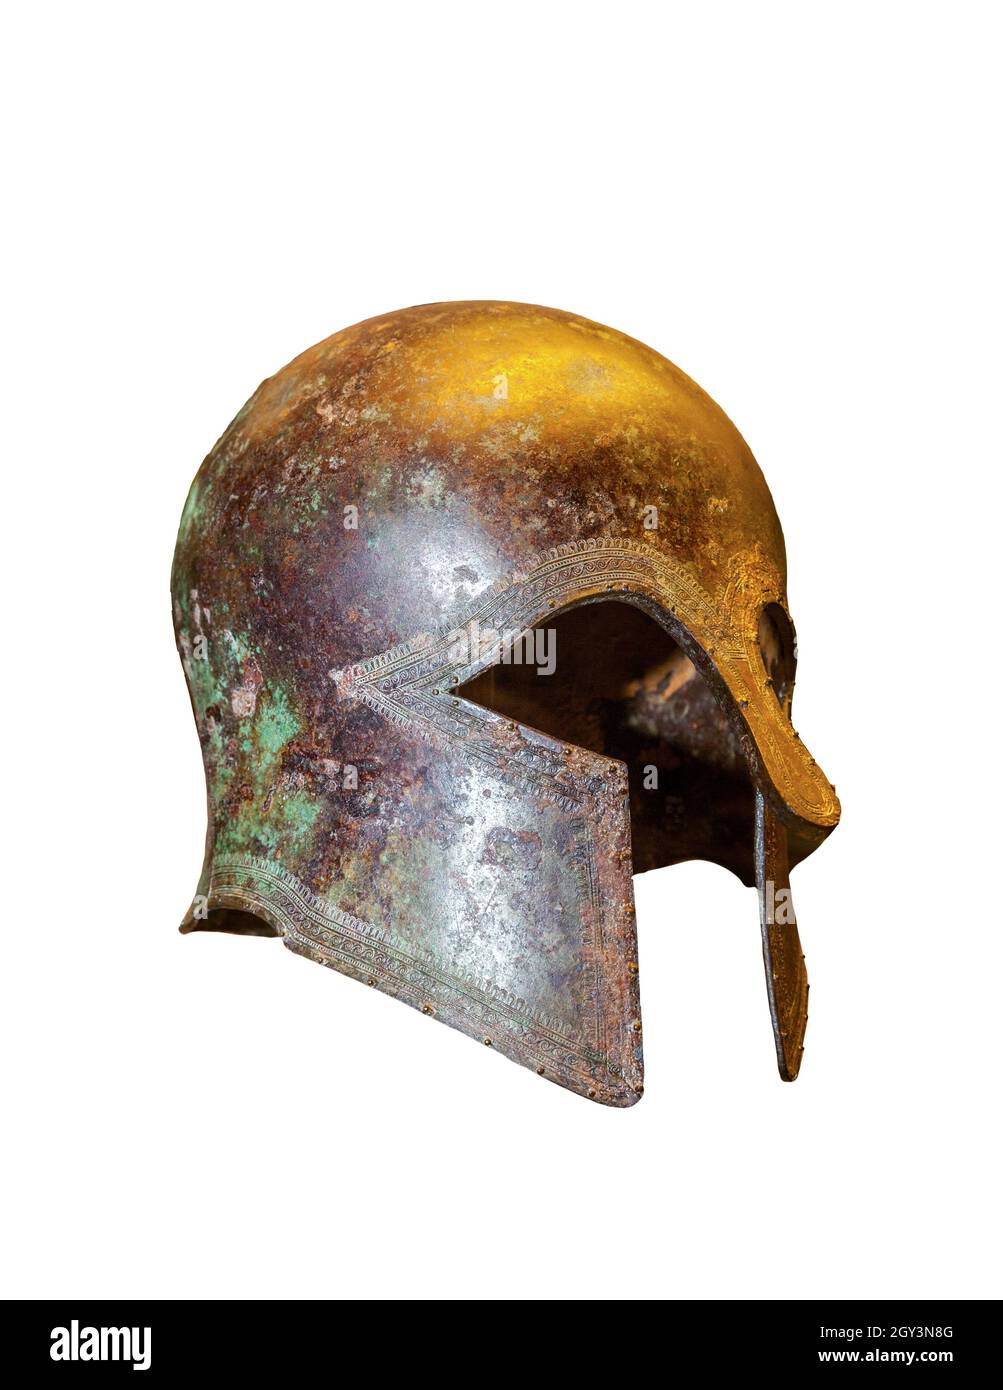 Greek Corinthian Helmet. The Corinthian helmet originated in ancient Greece and took its name from the city-state of Corinth. It was a helmet made of Stock Photo